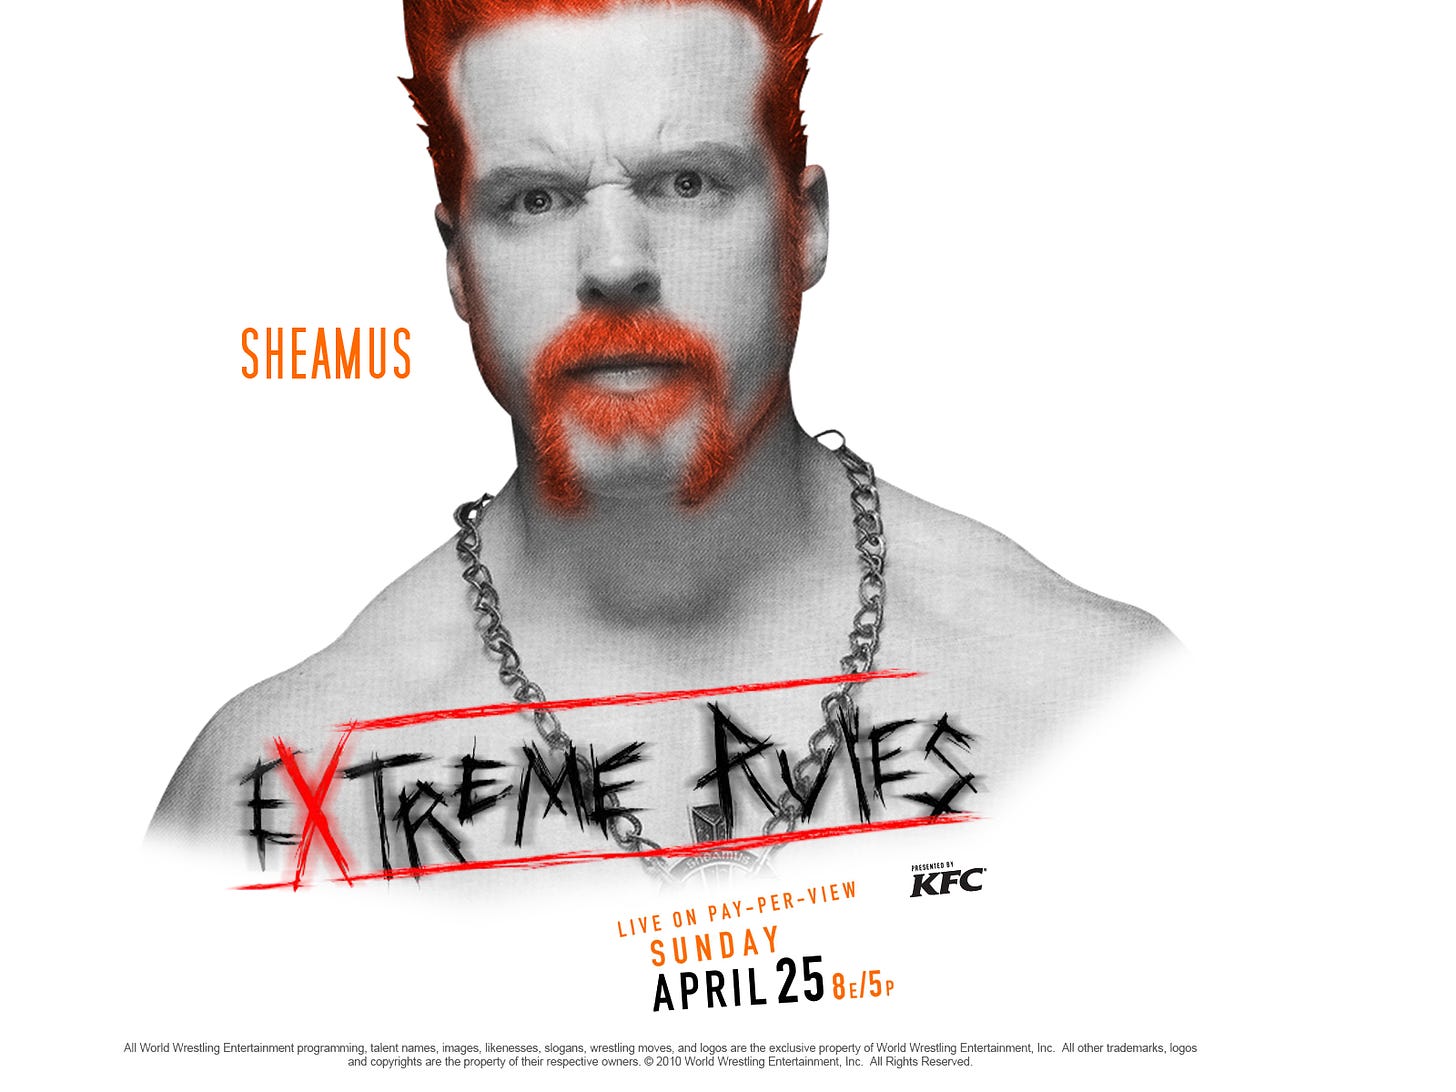 Extreme Rules 2010 Poster by DecadeofSmackdownV2 on DeviantArt